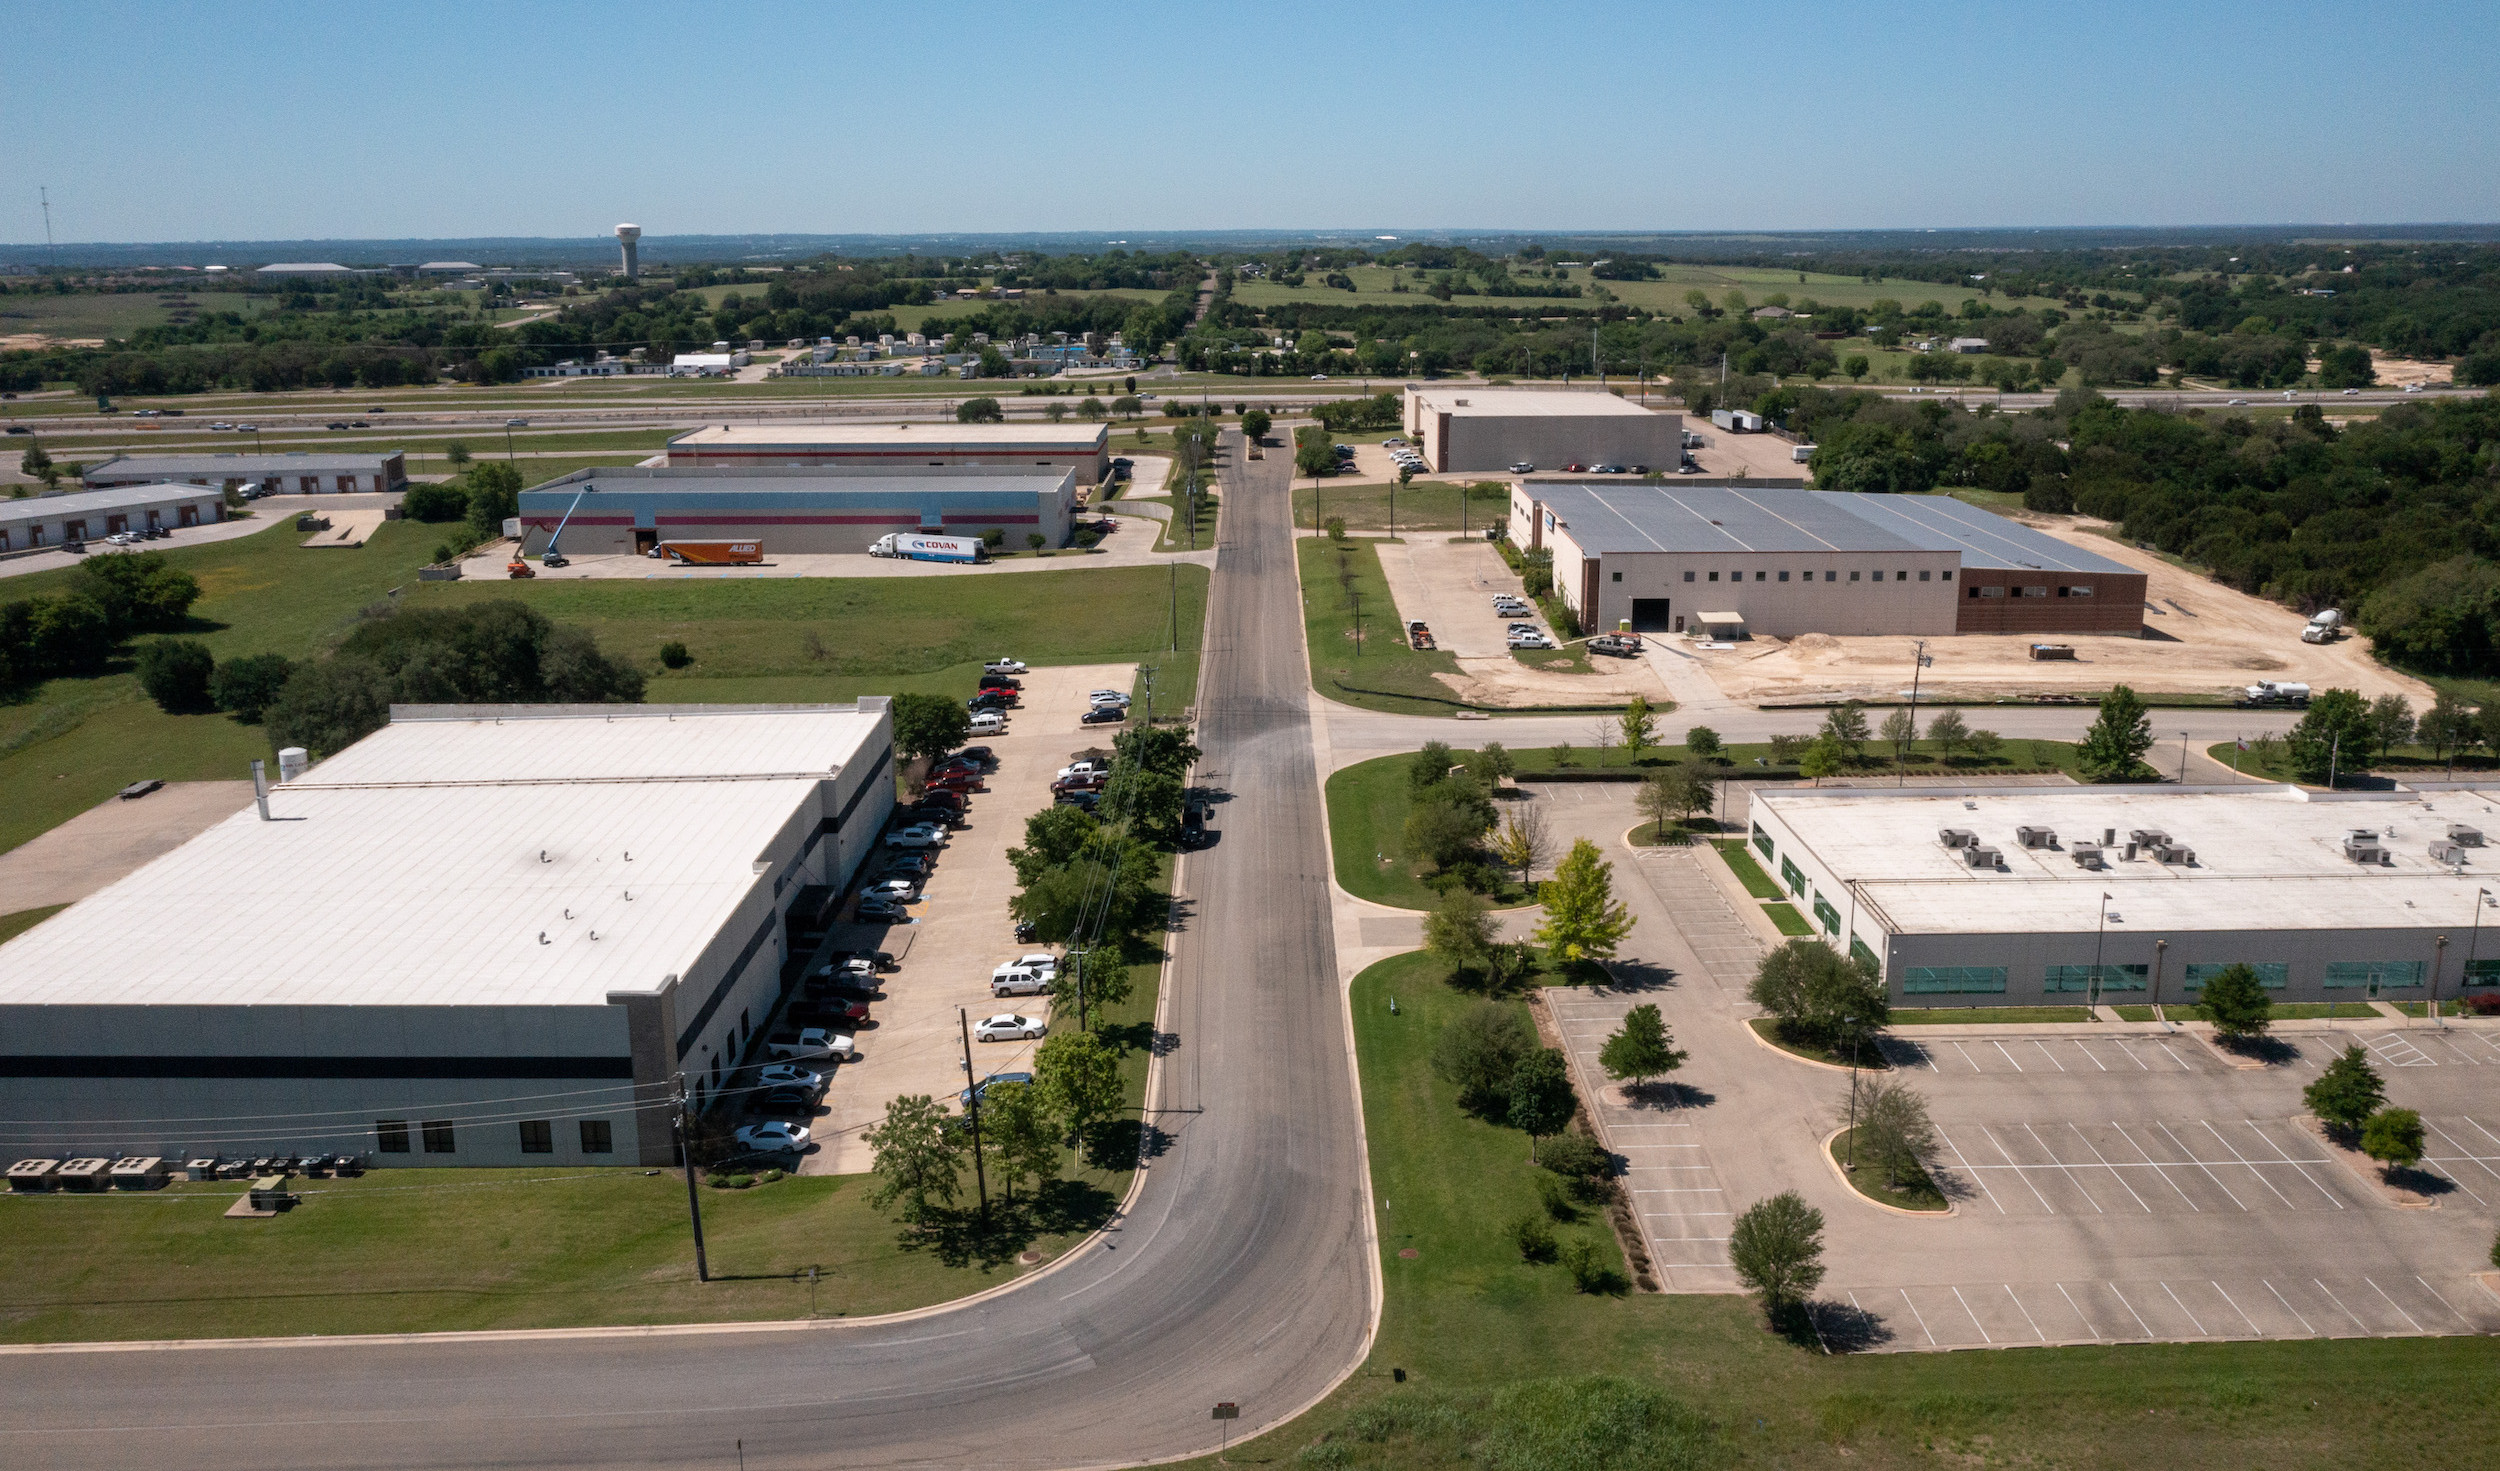 Aerial view of warehouses in the business park